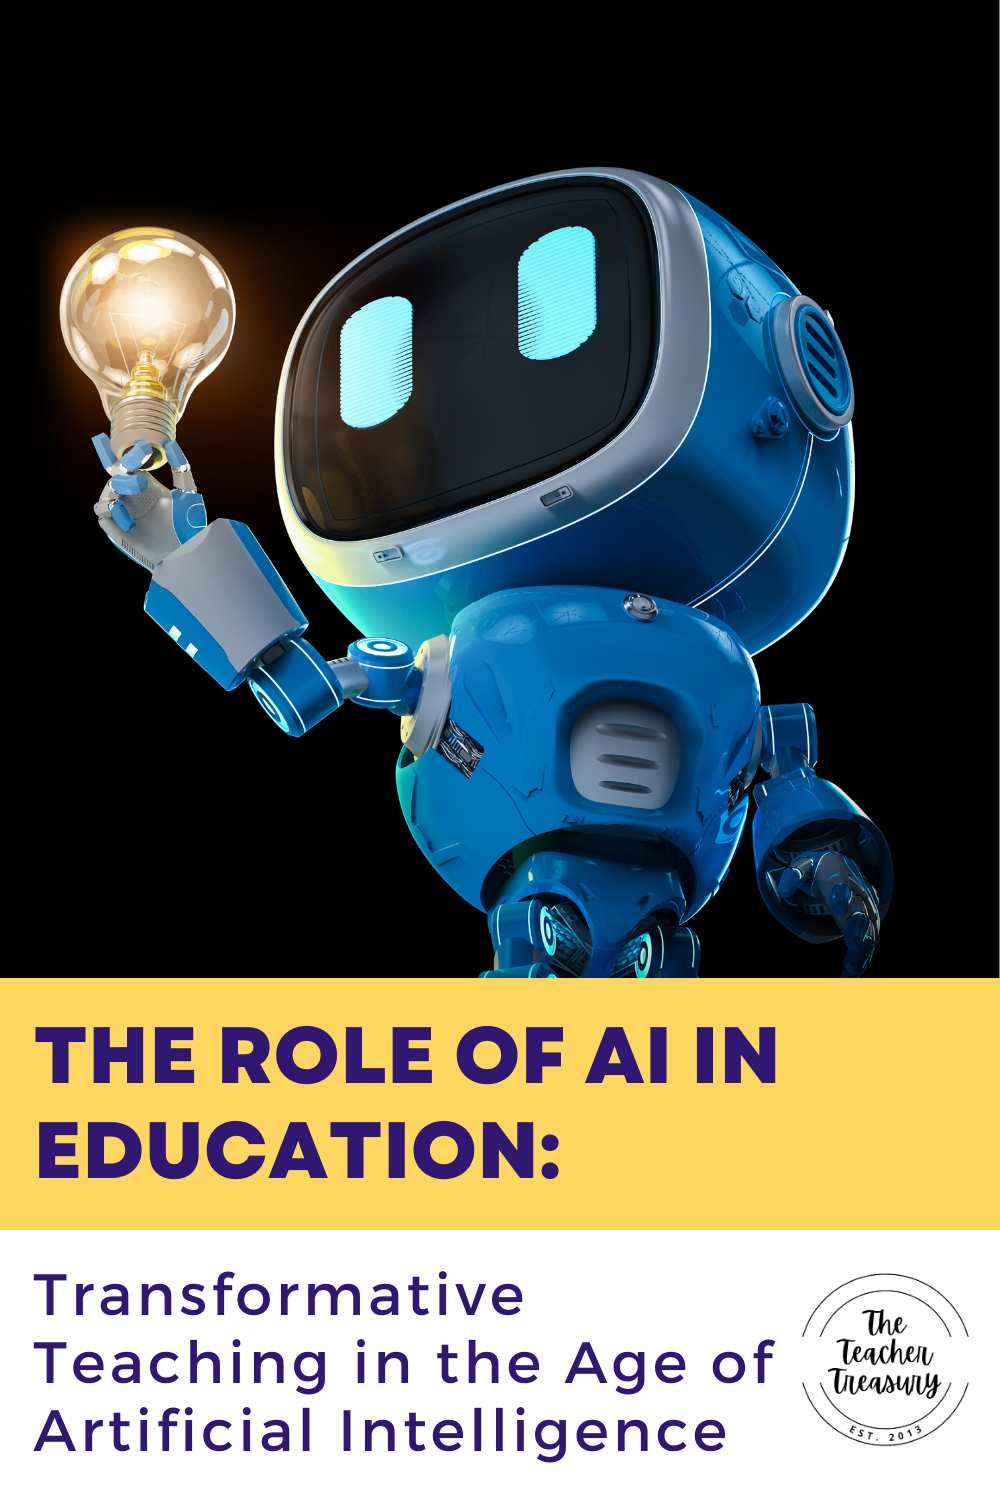 The Role Of AI In Education